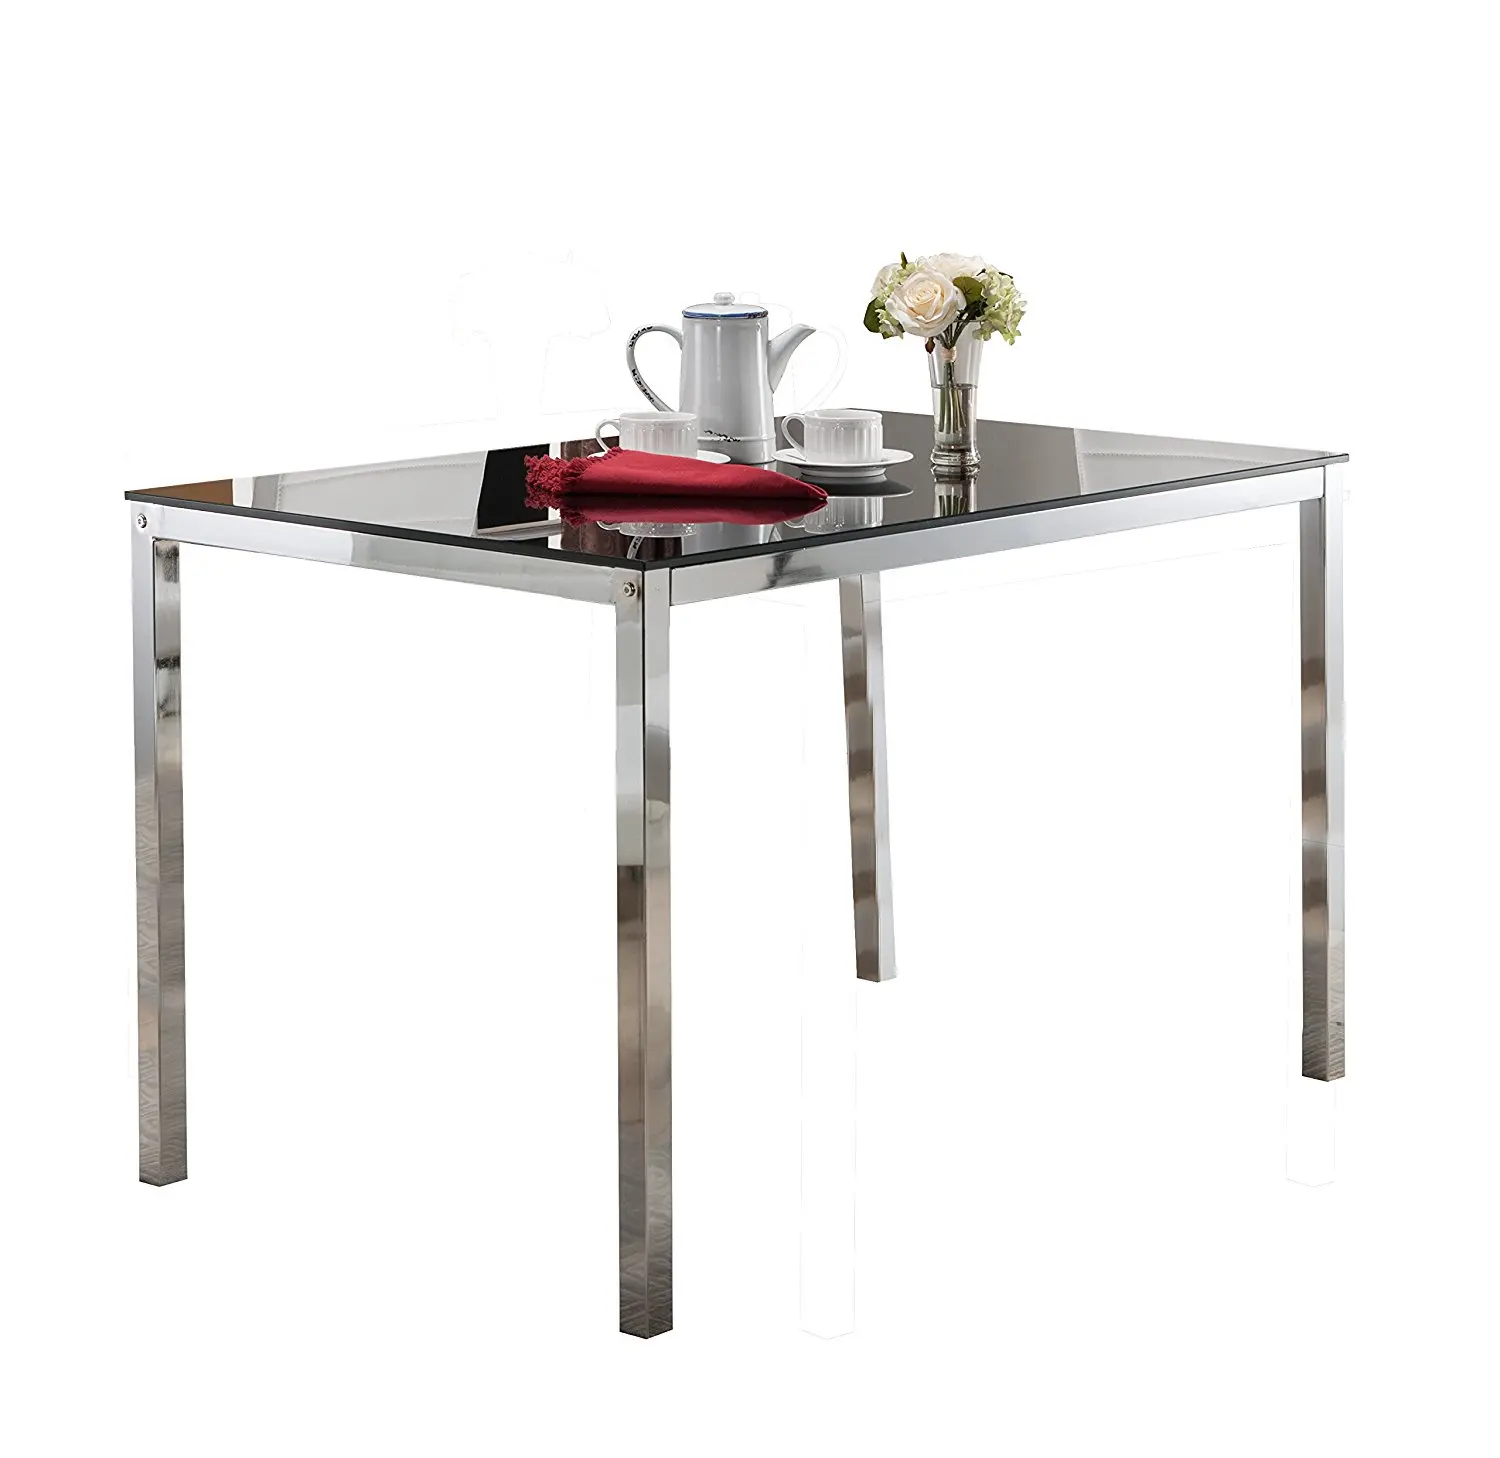 InRoom Designs Kings Brand Furniture Chrome Base, Rectangle Modern Dining Table with Glass top